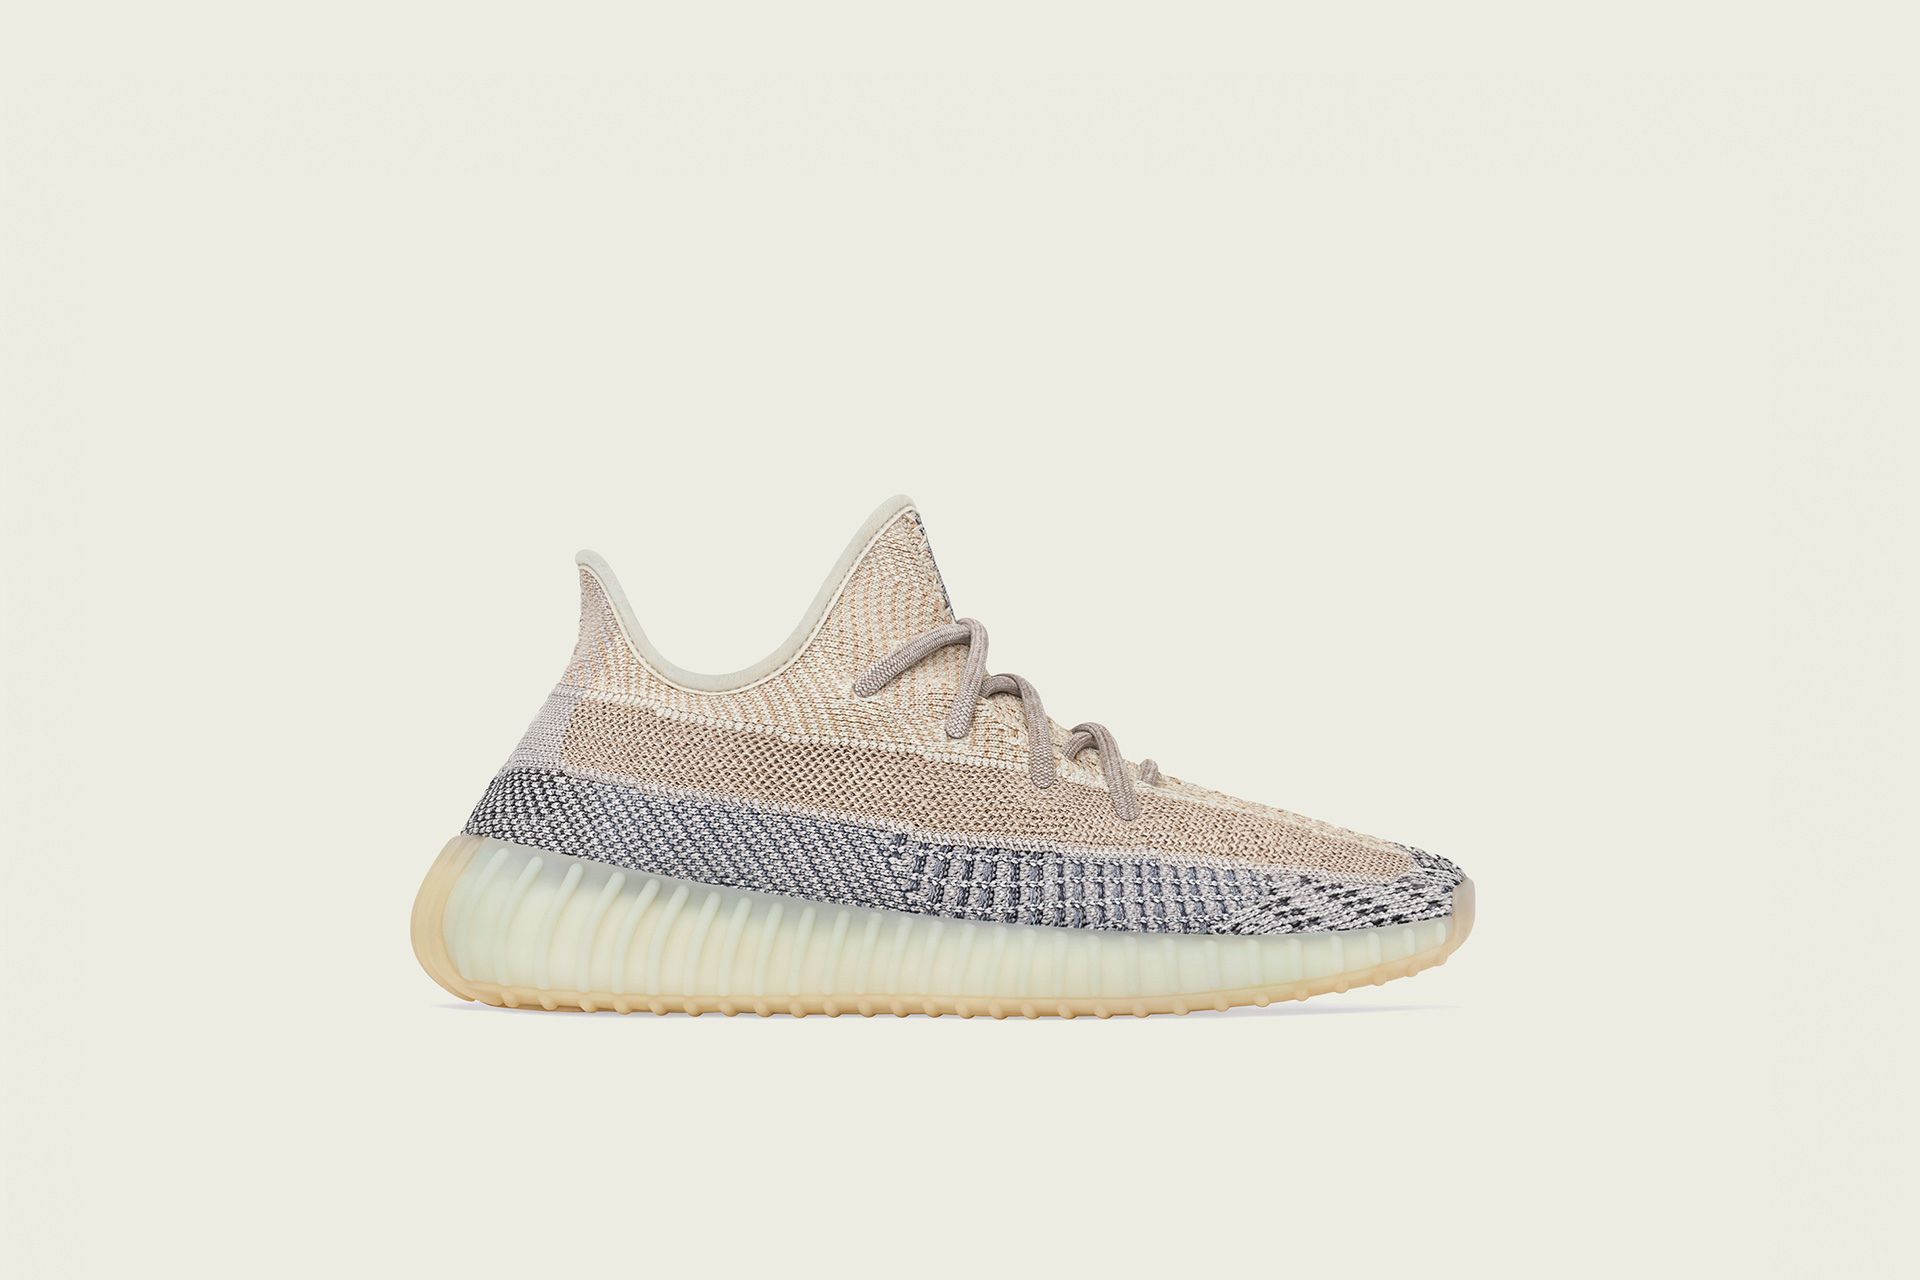 adidas Yeezy Boost 350 V2 - GY7658 - Ash Pearl - Footshop - Releases